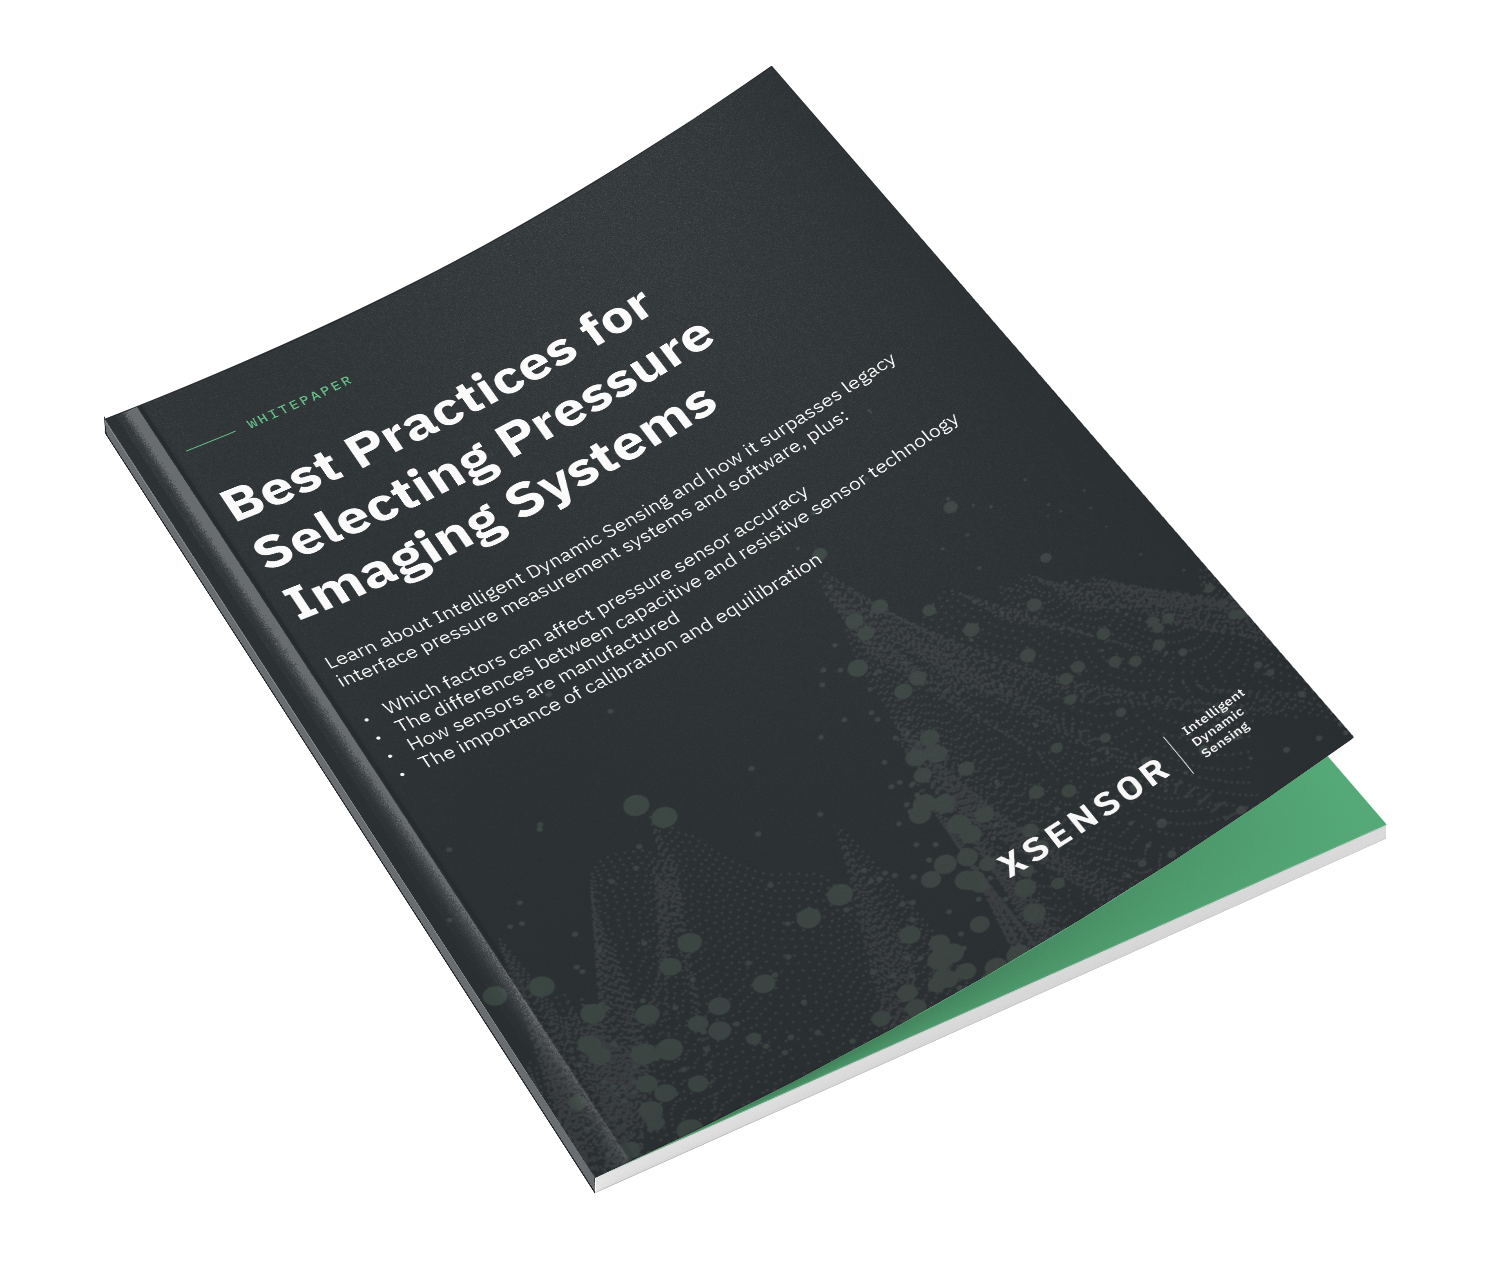 Best Practices for Selecting Pressure Imaging Systems Whitepaper